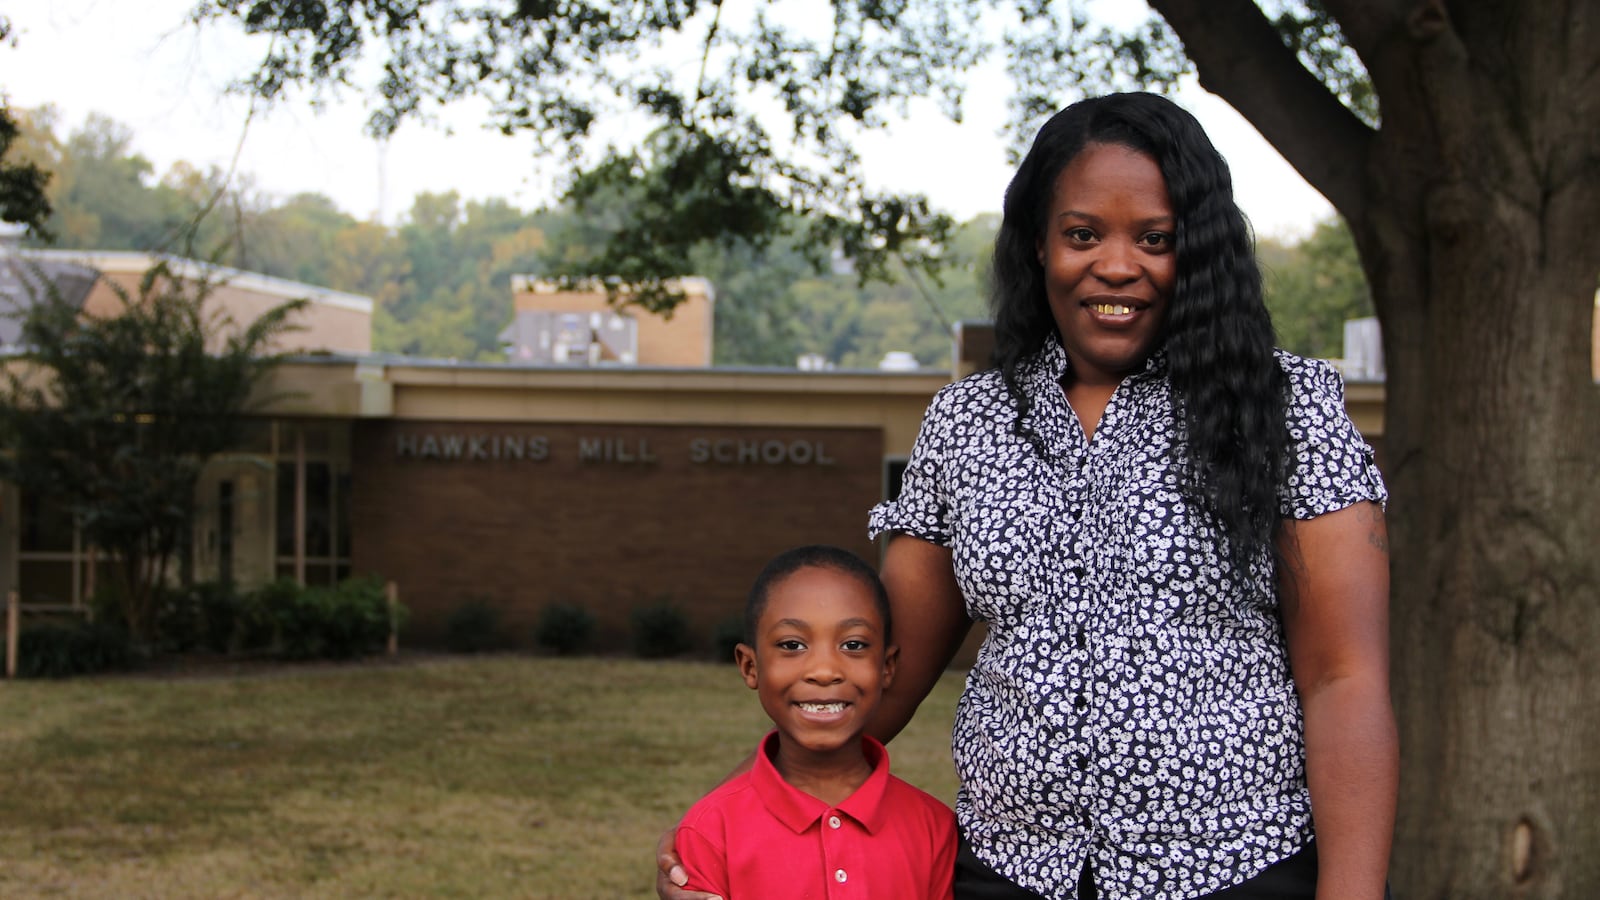 Alicia Tomlinson stands with her son, Jacobi, outside of Hawkins Mill Elementary School, where Jacobi is in the first grade. Tomlinson has applied to serve on her school's neighborhood advisory council.